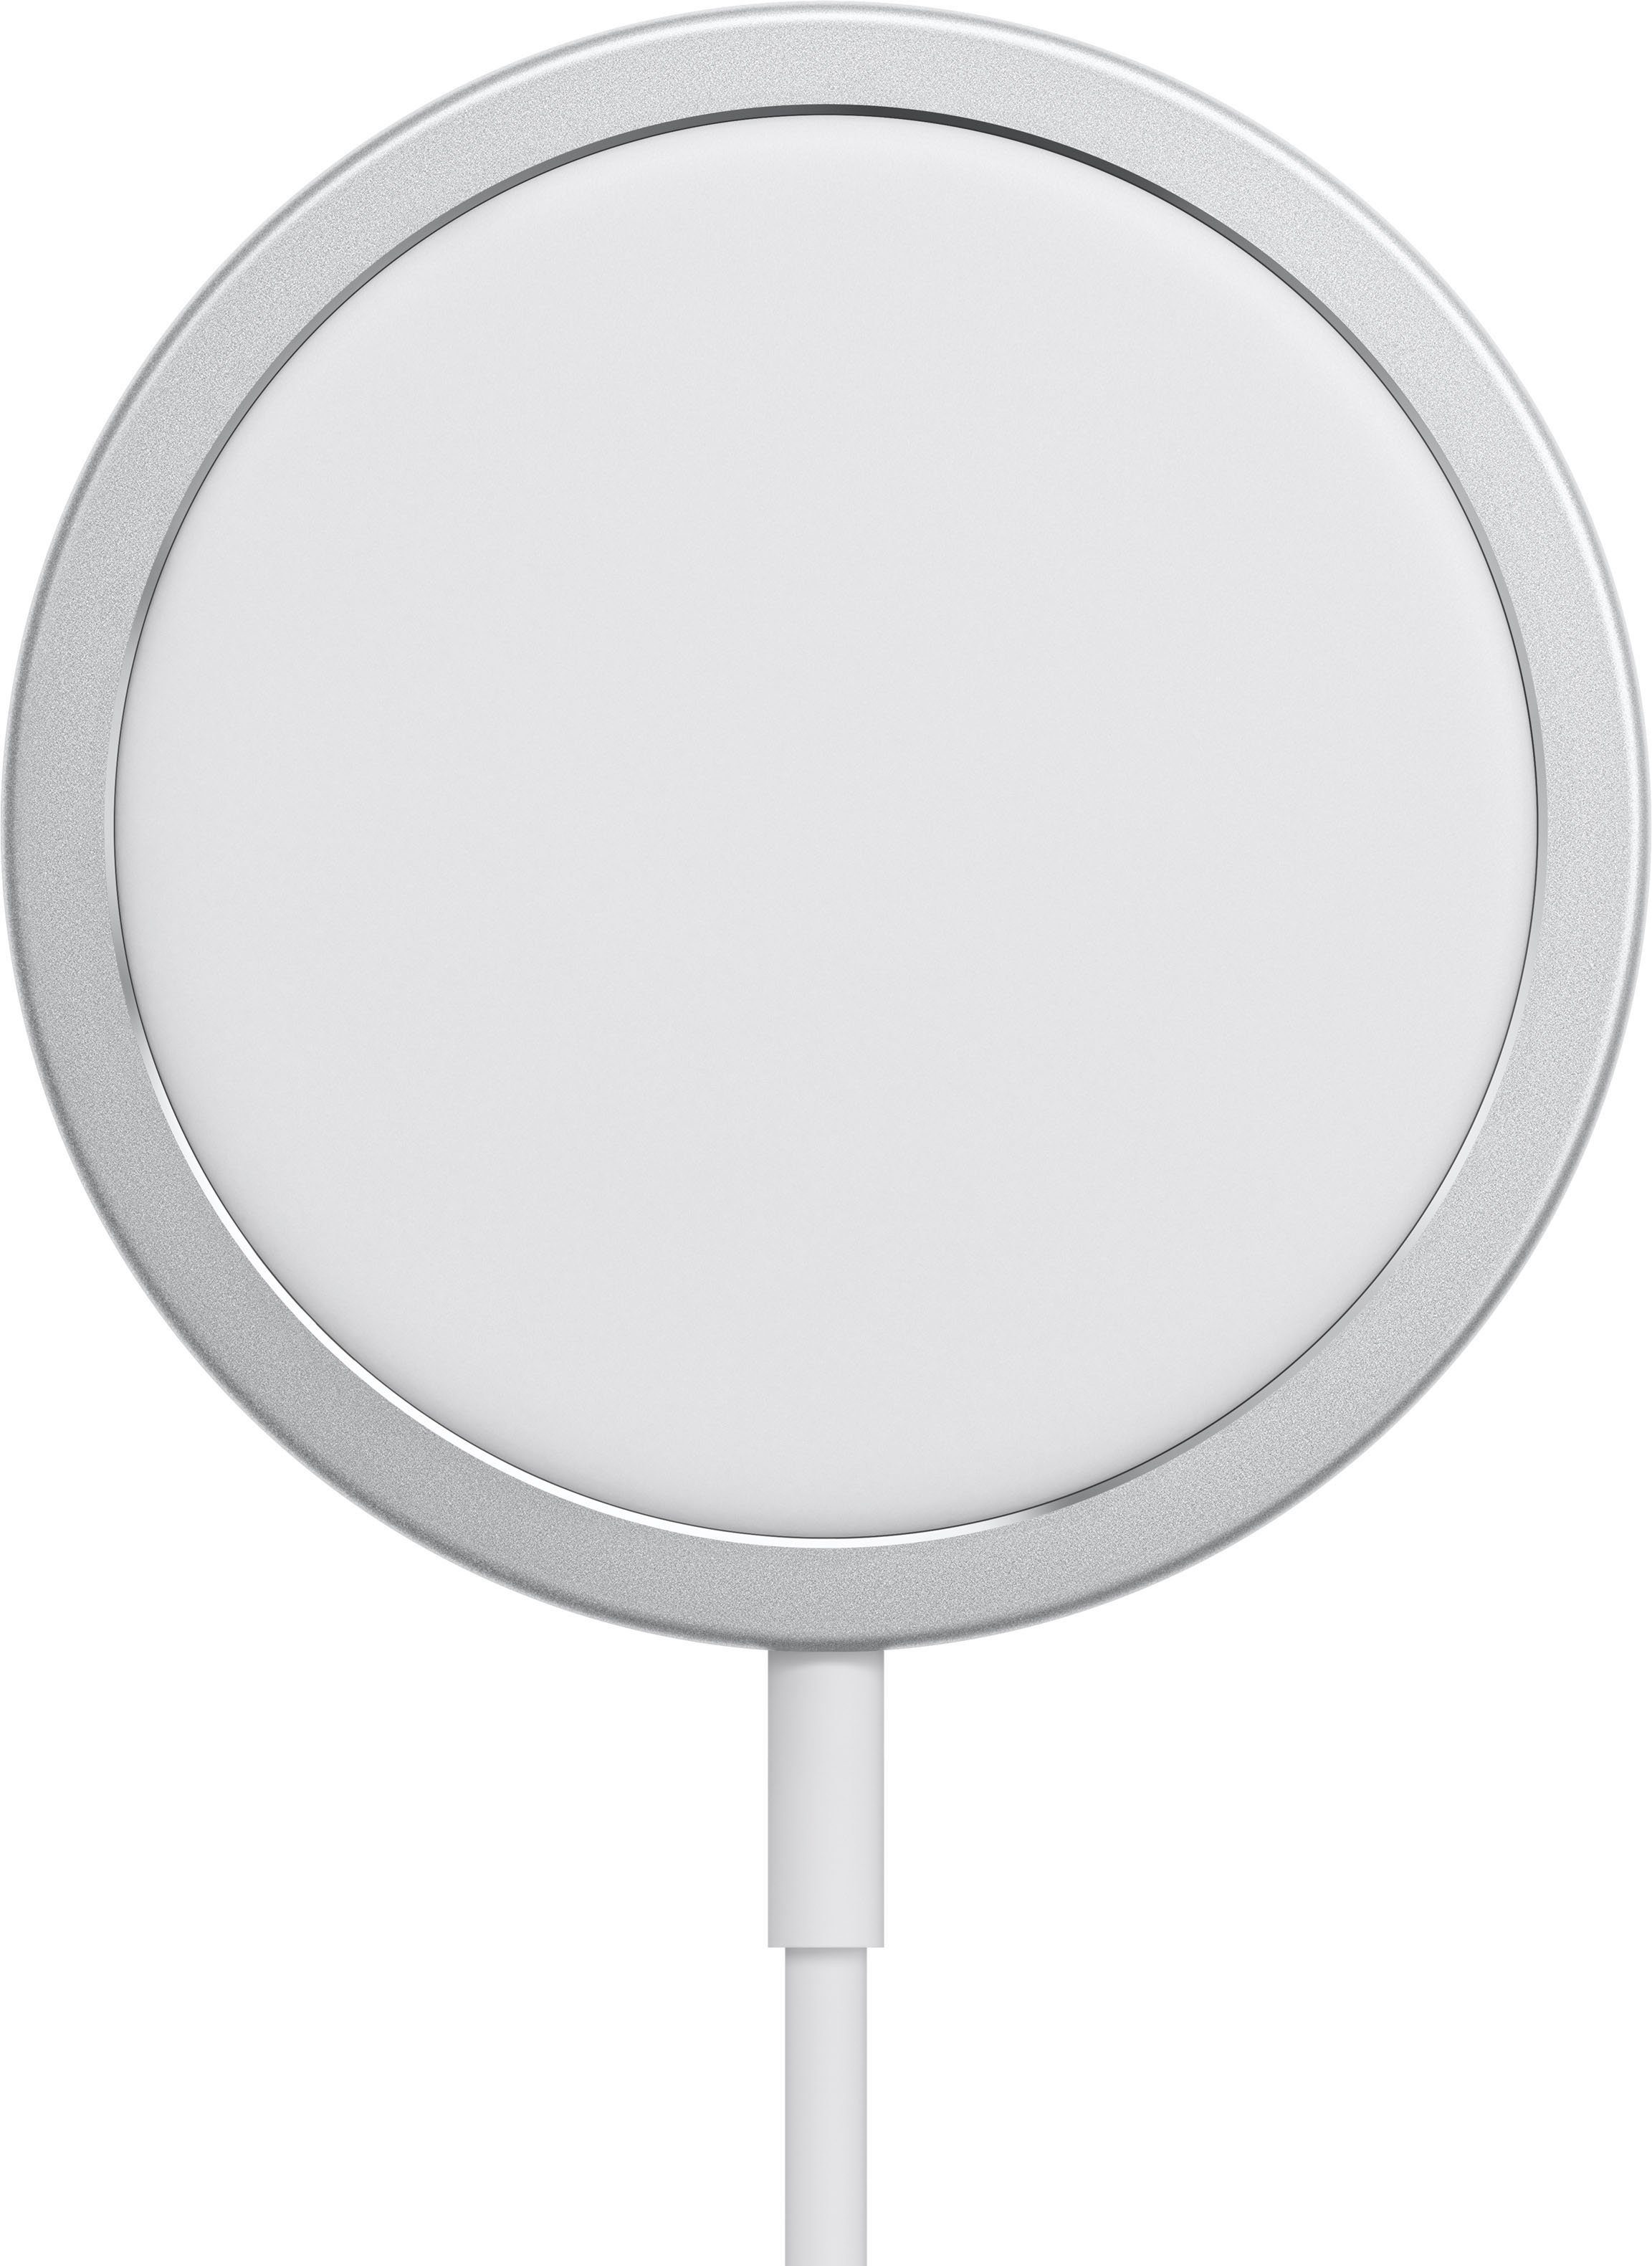 Apple »MagSafe Strom Adapter« Wireless Charger (Kompatibilität: iPhone 12  Pro iPhone 12 Pro Max